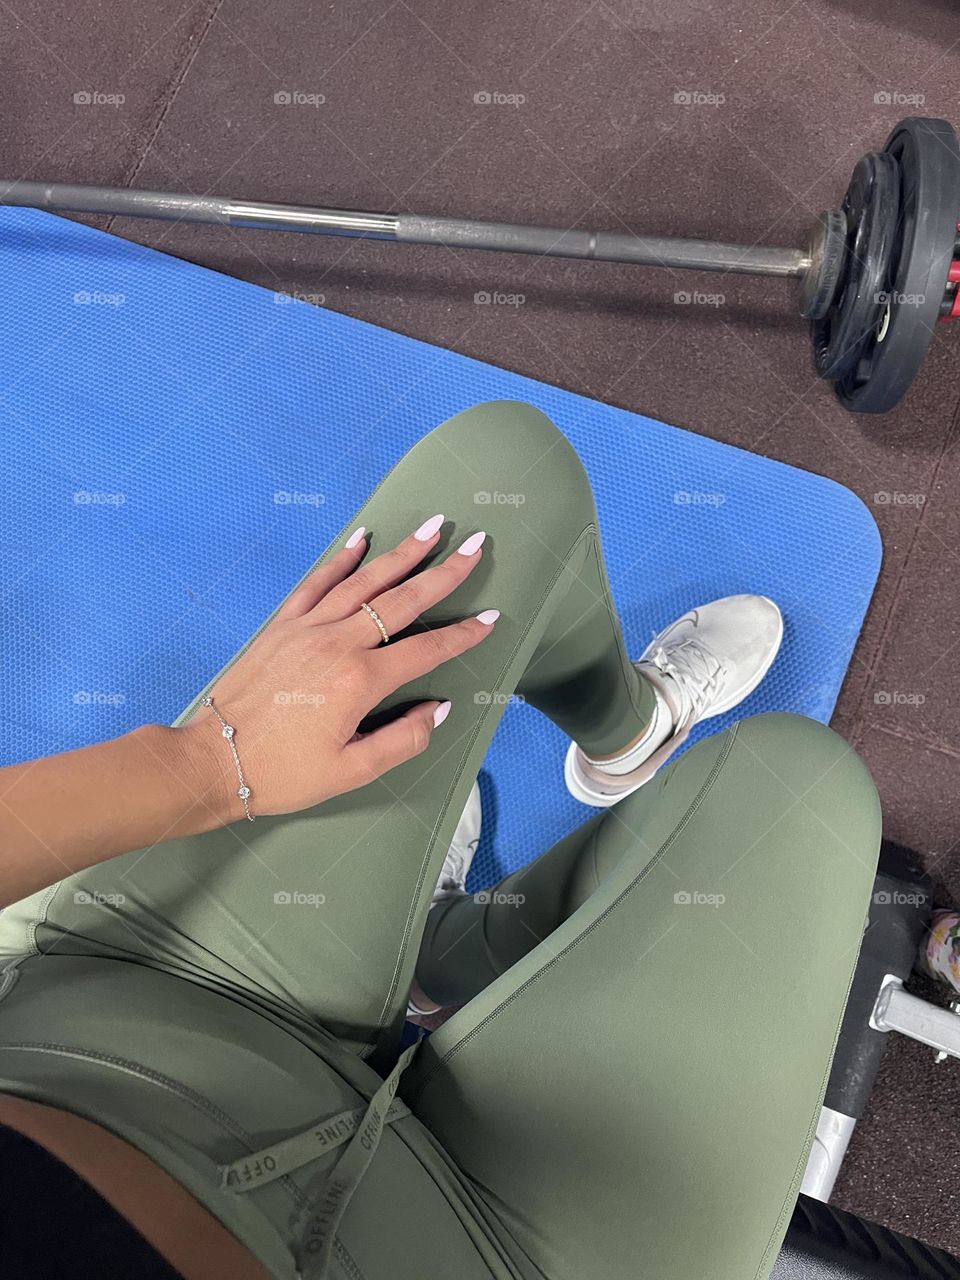 Lifting weights with manicure 💅